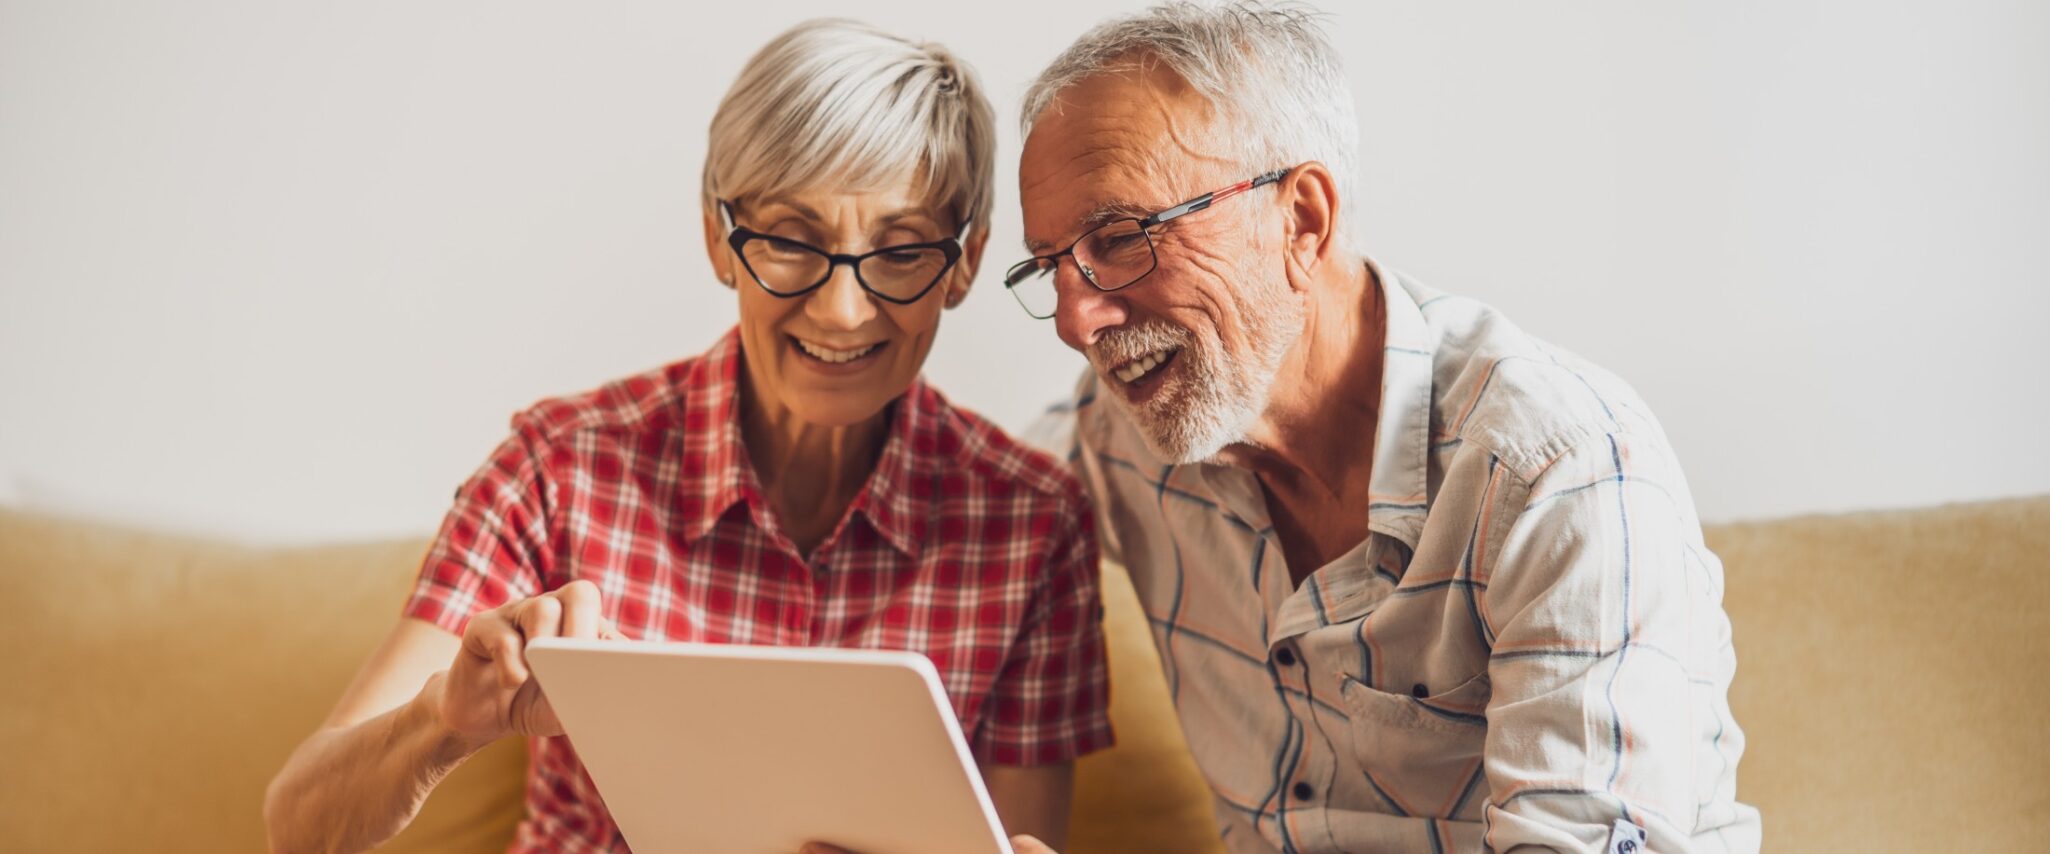 A smiling senior woman and man sit on a couch and look at a tablet together.